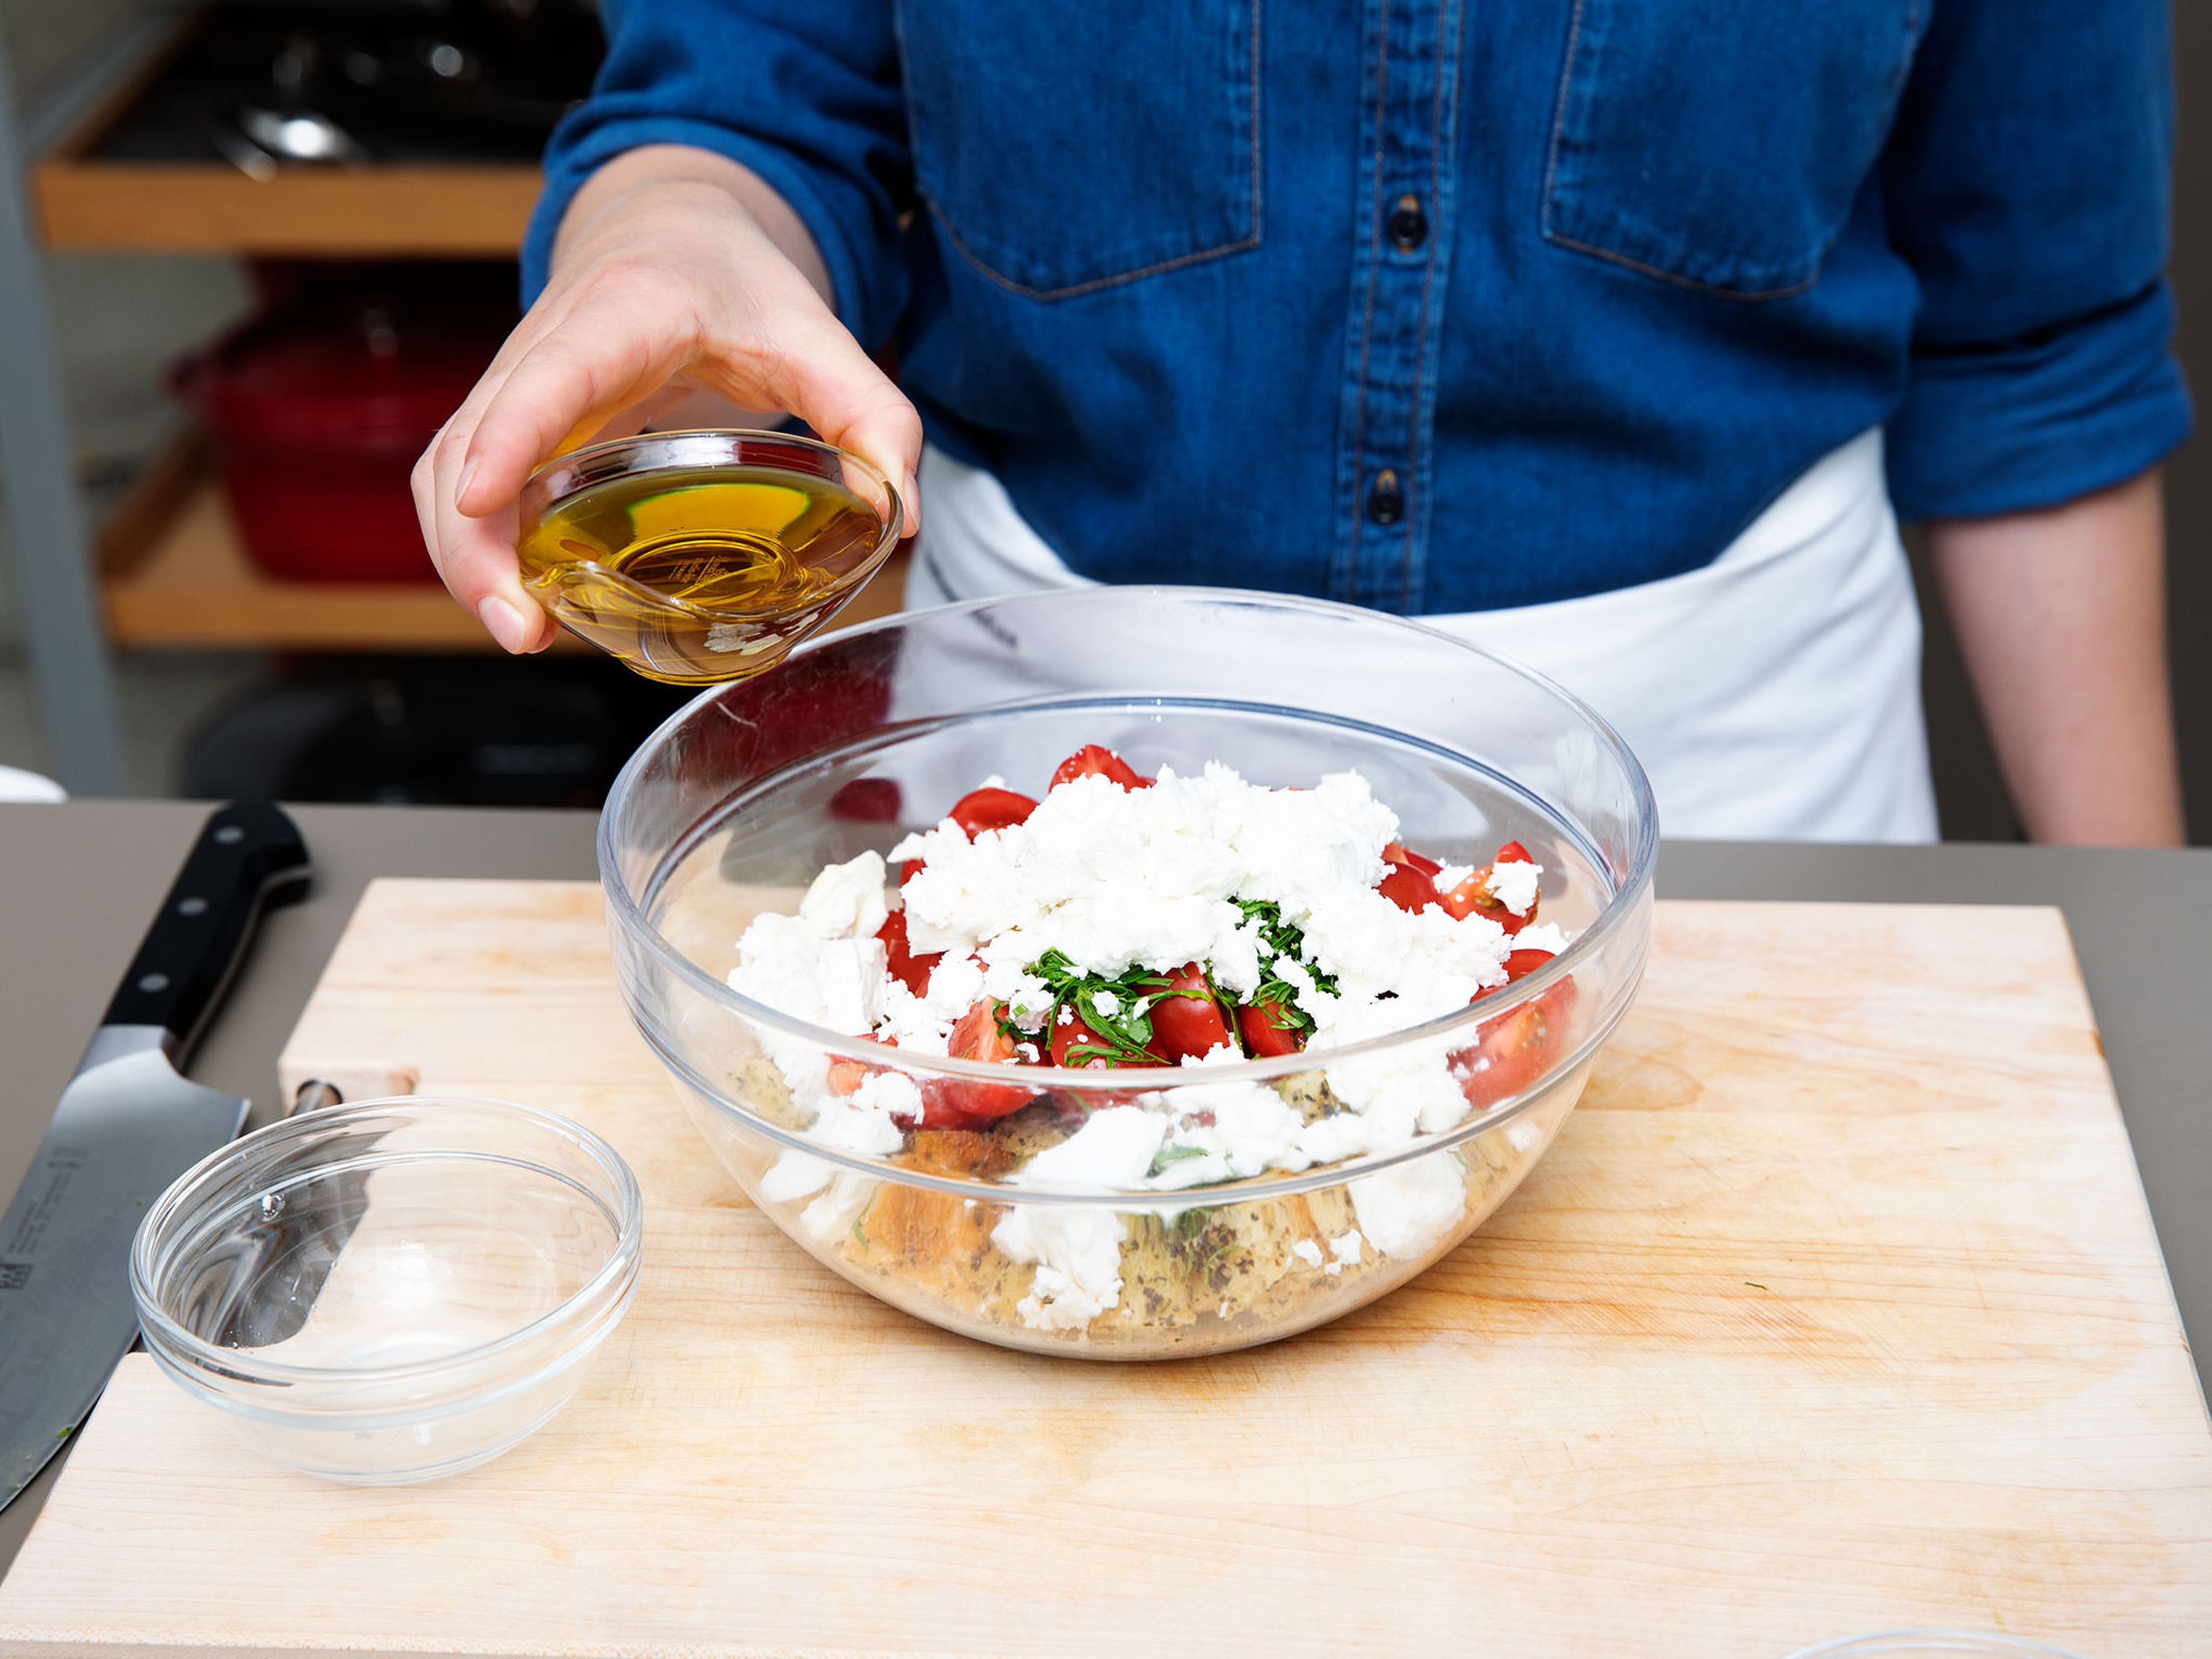 To make the tomato and bread salad, quarter the cherry tomatoes and place into a serving bowl. Slice basil into thin ribbons, crumble in the feta cheese, add olive oil, and season with salt and pepper. Toss well and set aside.